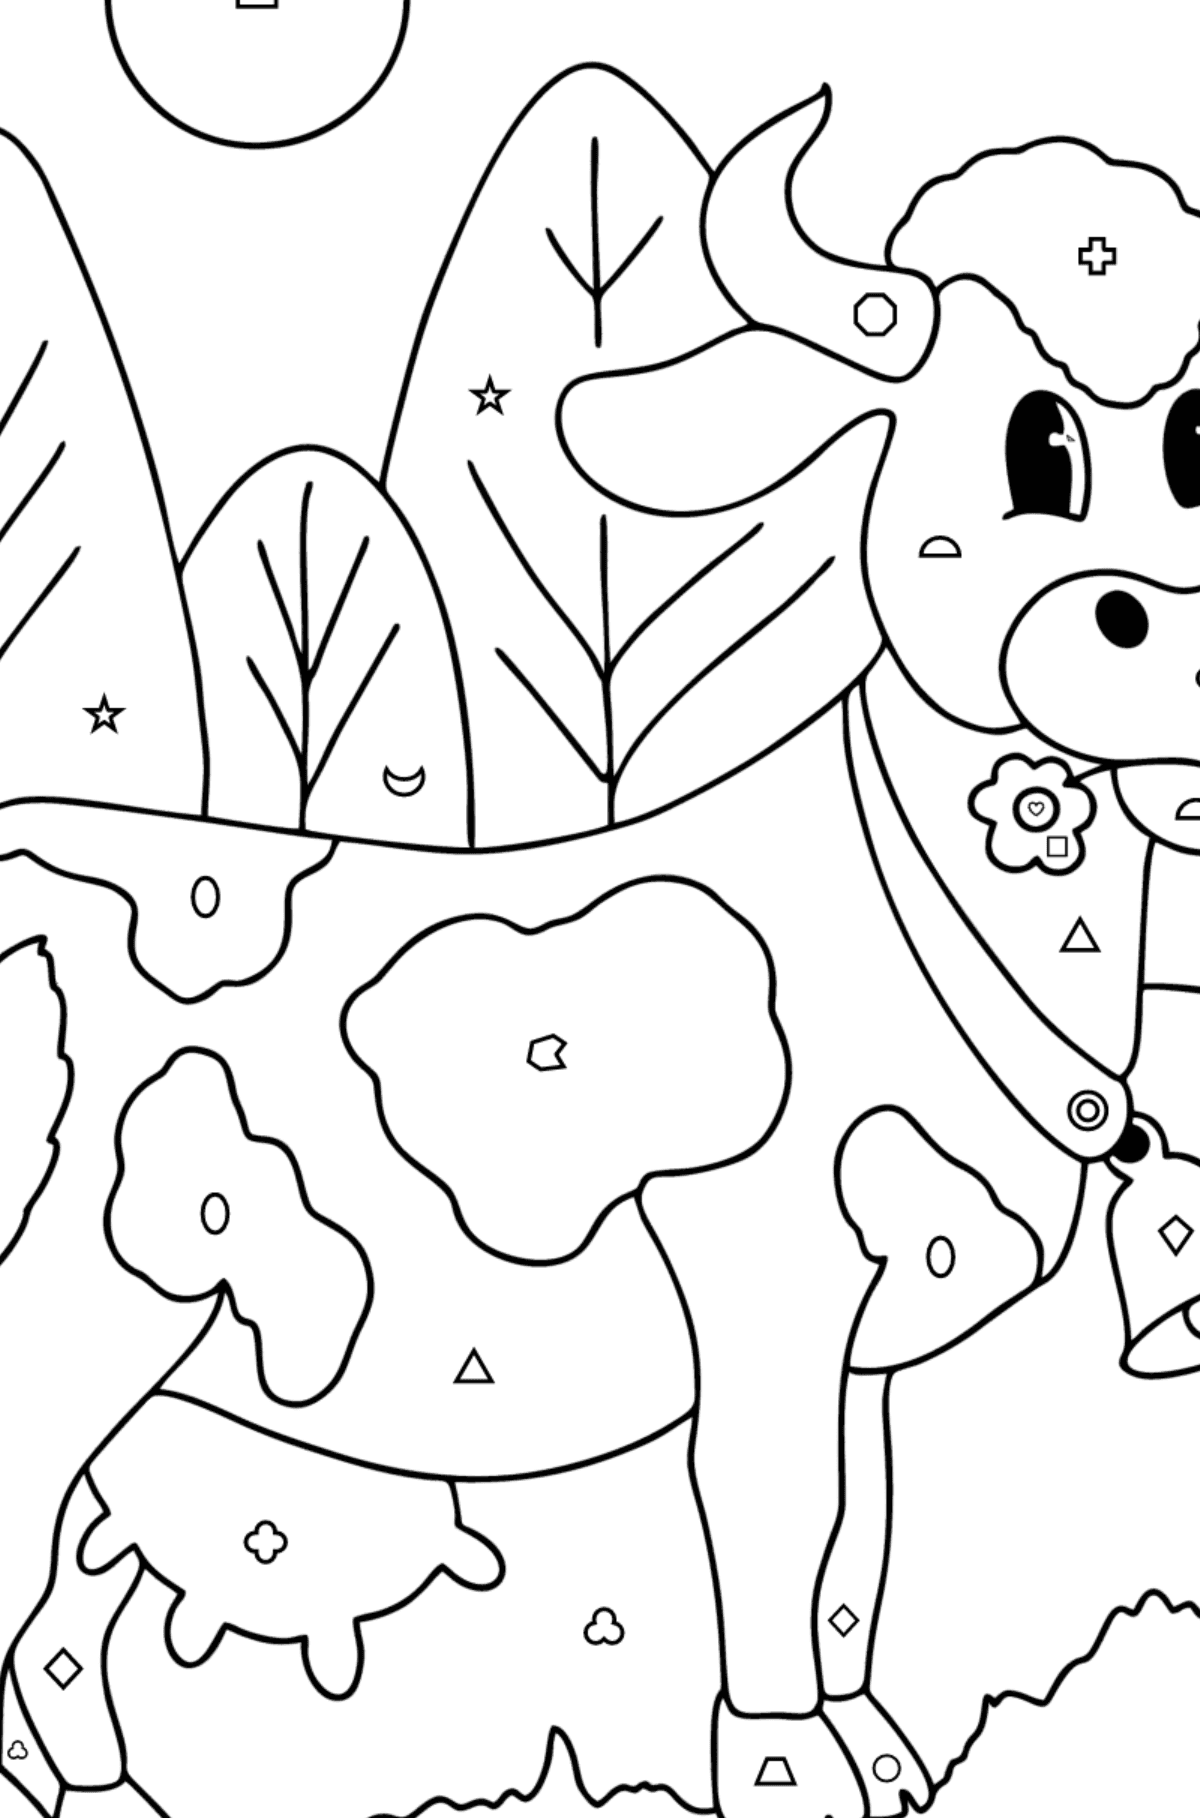 Realistic cow coloring page - Coloring by Geometric Shapes for Kids